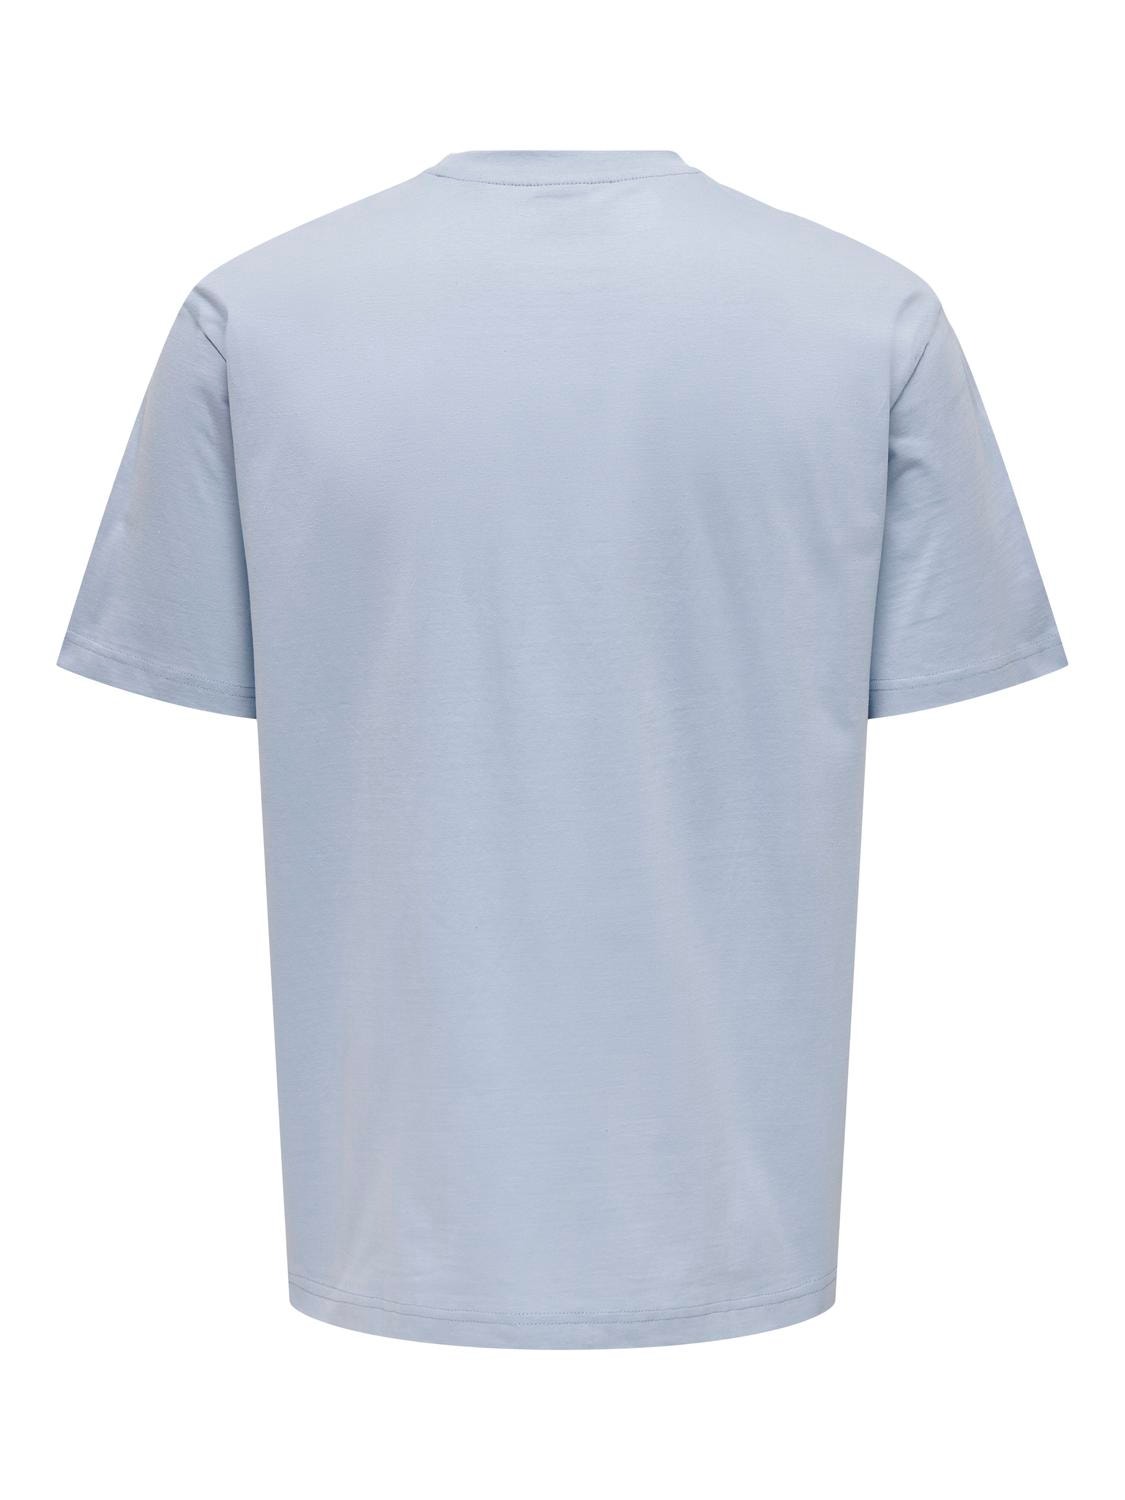 ONLY & SONS Relaxed Fit Round Neck T-Shirt -Eventide - 22022532